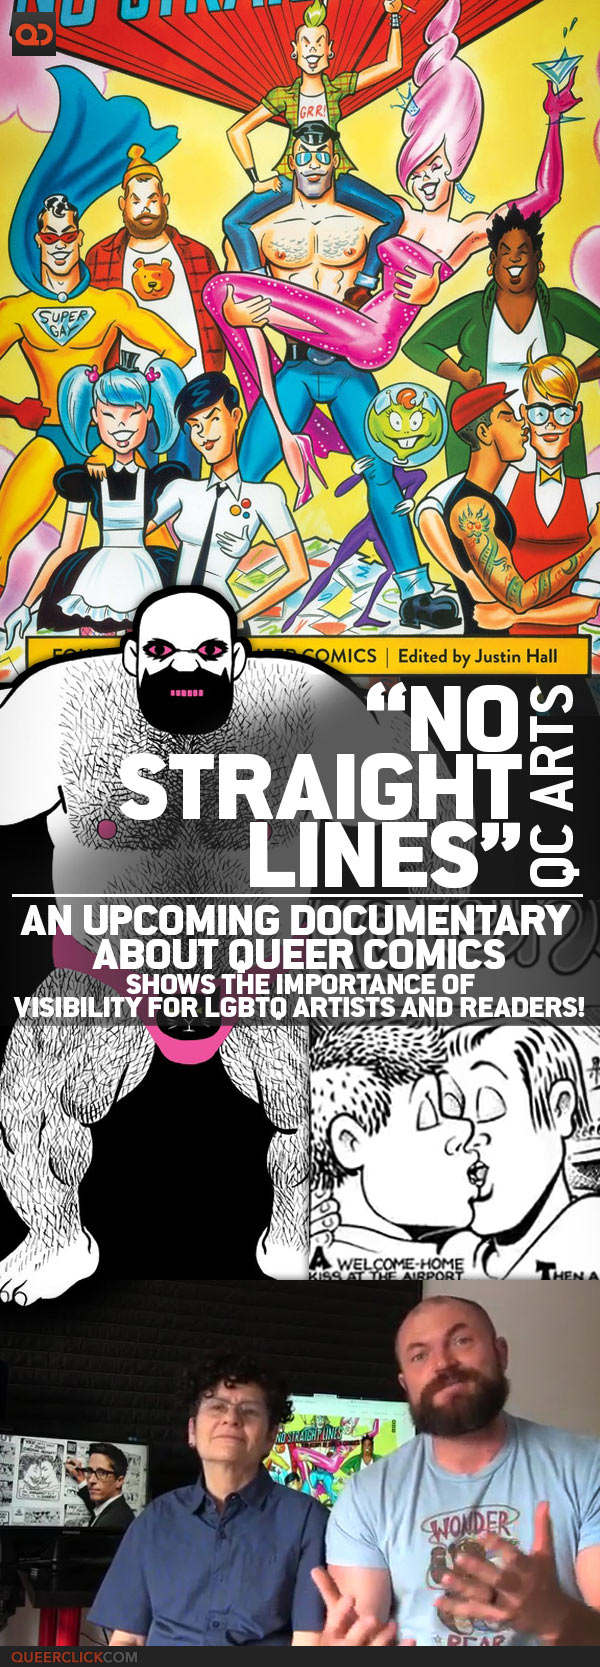 “No Straight Lines” An Upcoming Documentary About Queer Comics Shows The Importance Of LGBTQ Visibility!